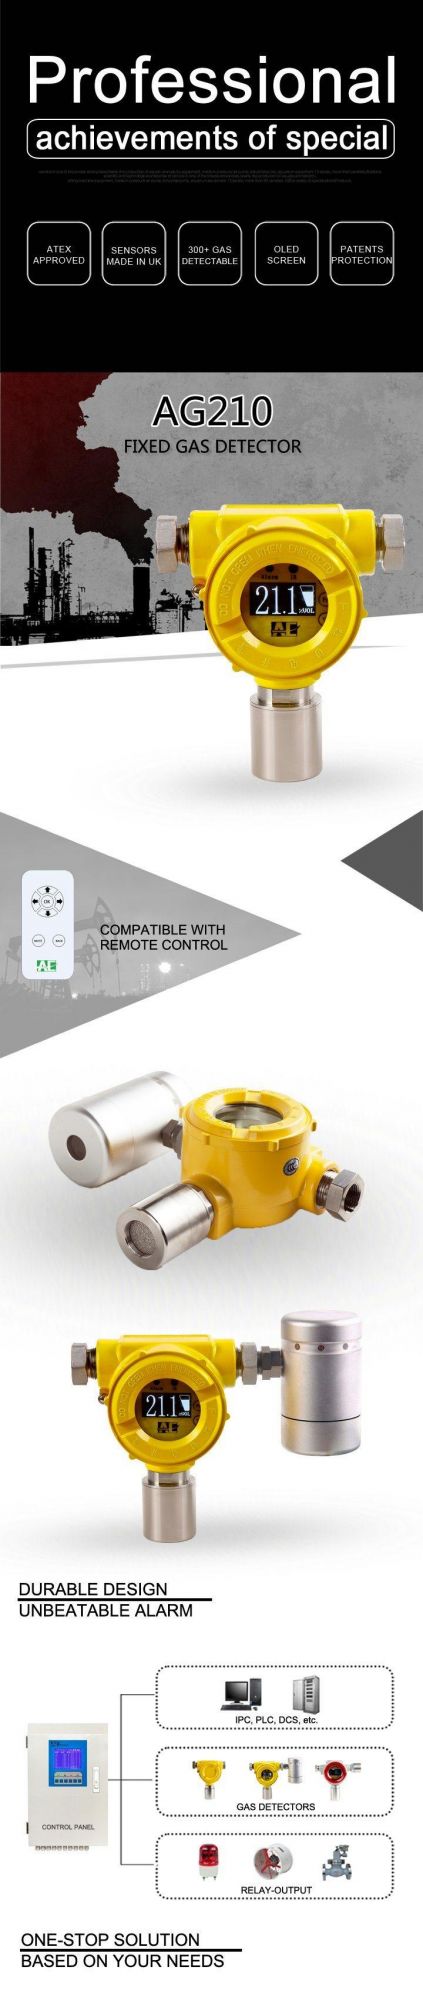 Atex Certified Wall-Mounted Gas Leak Detector for Monitoring 0-25%Vol O2